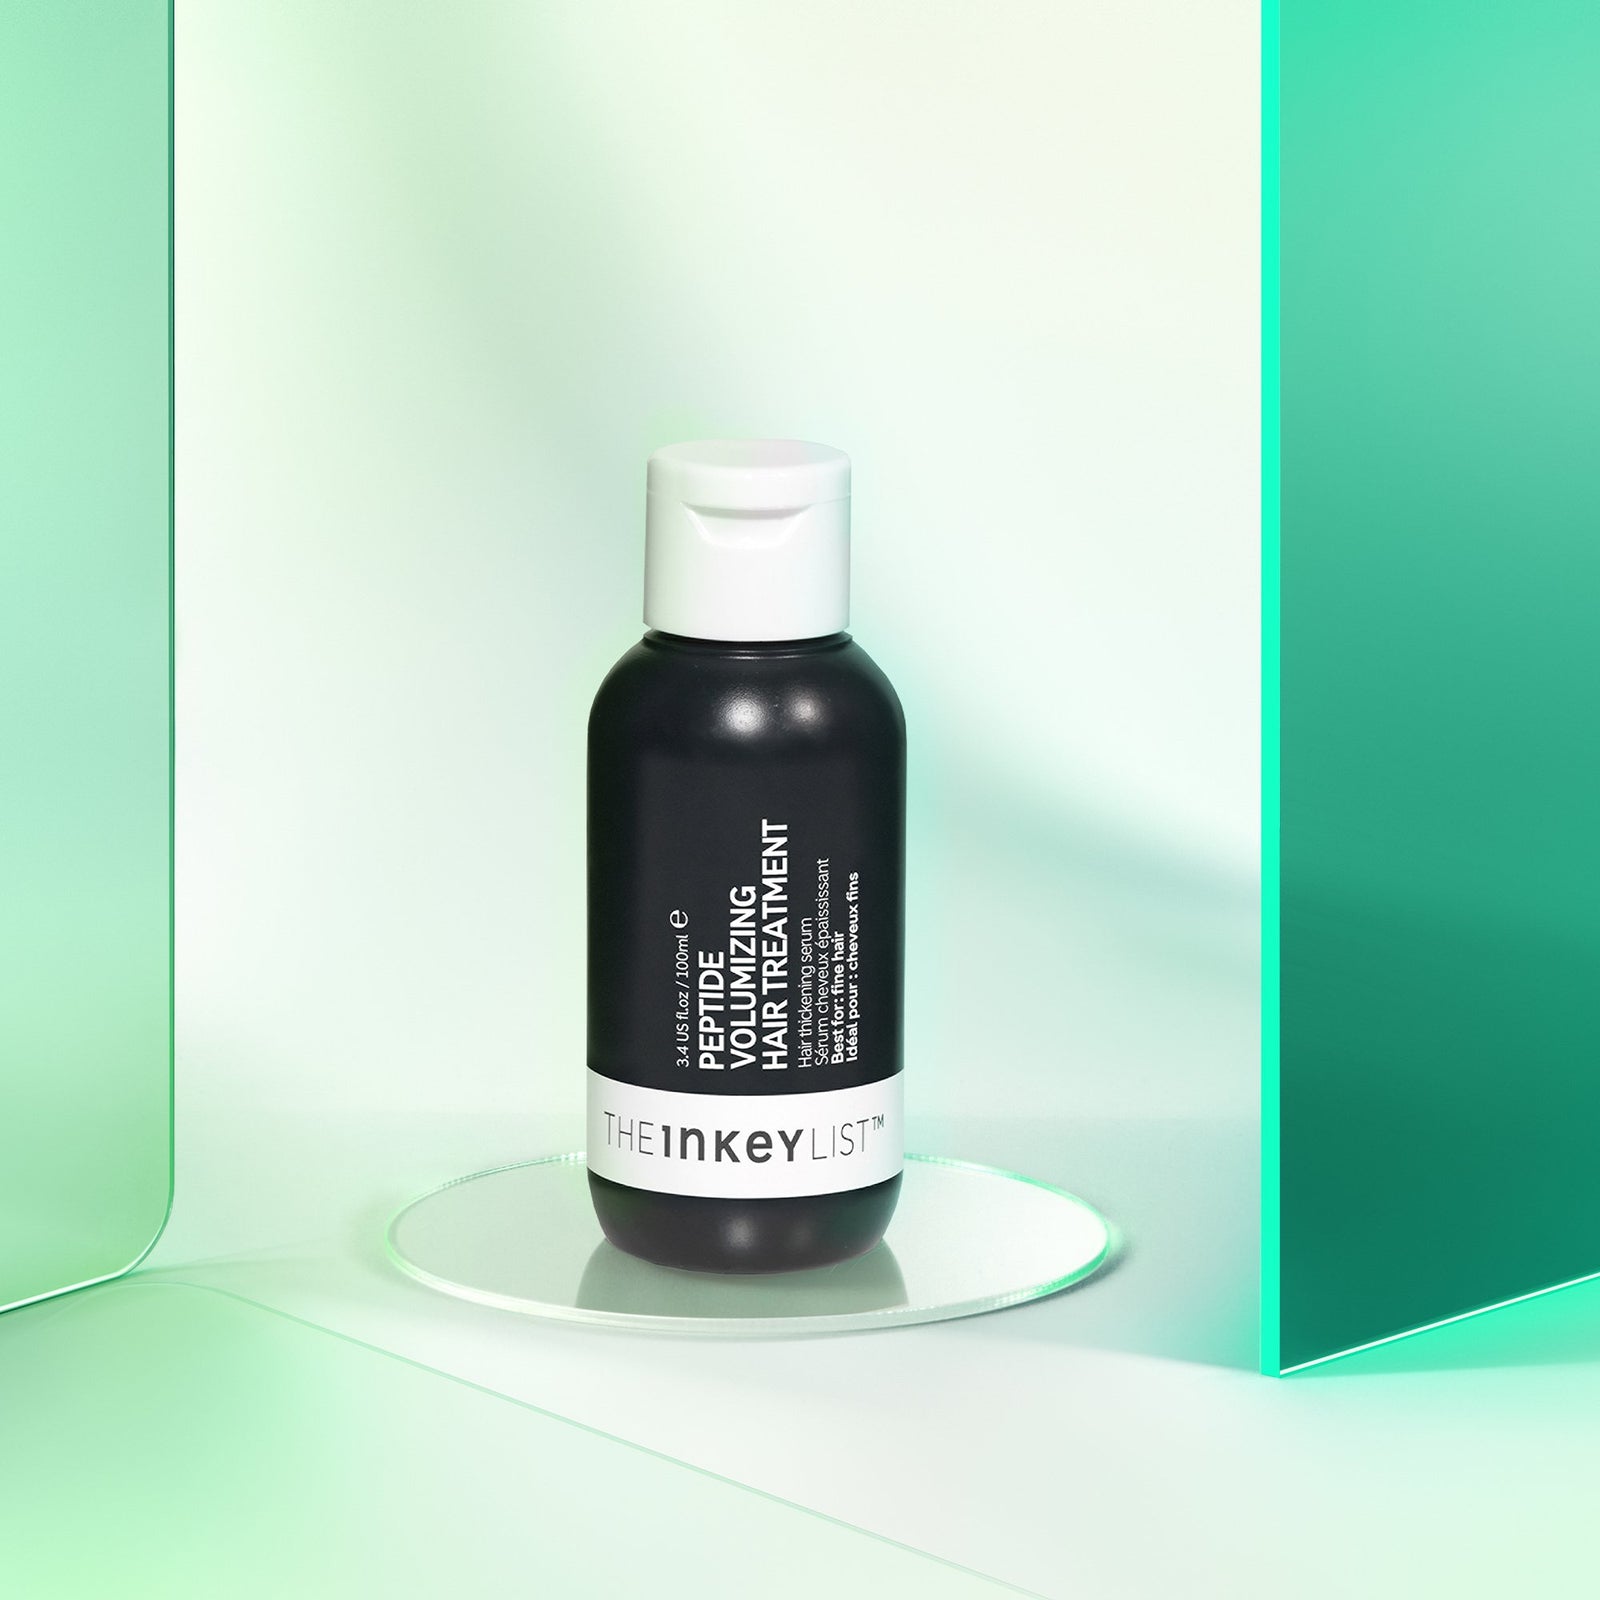 Peptide Volumizing Hair Treatment product against a glossy green background